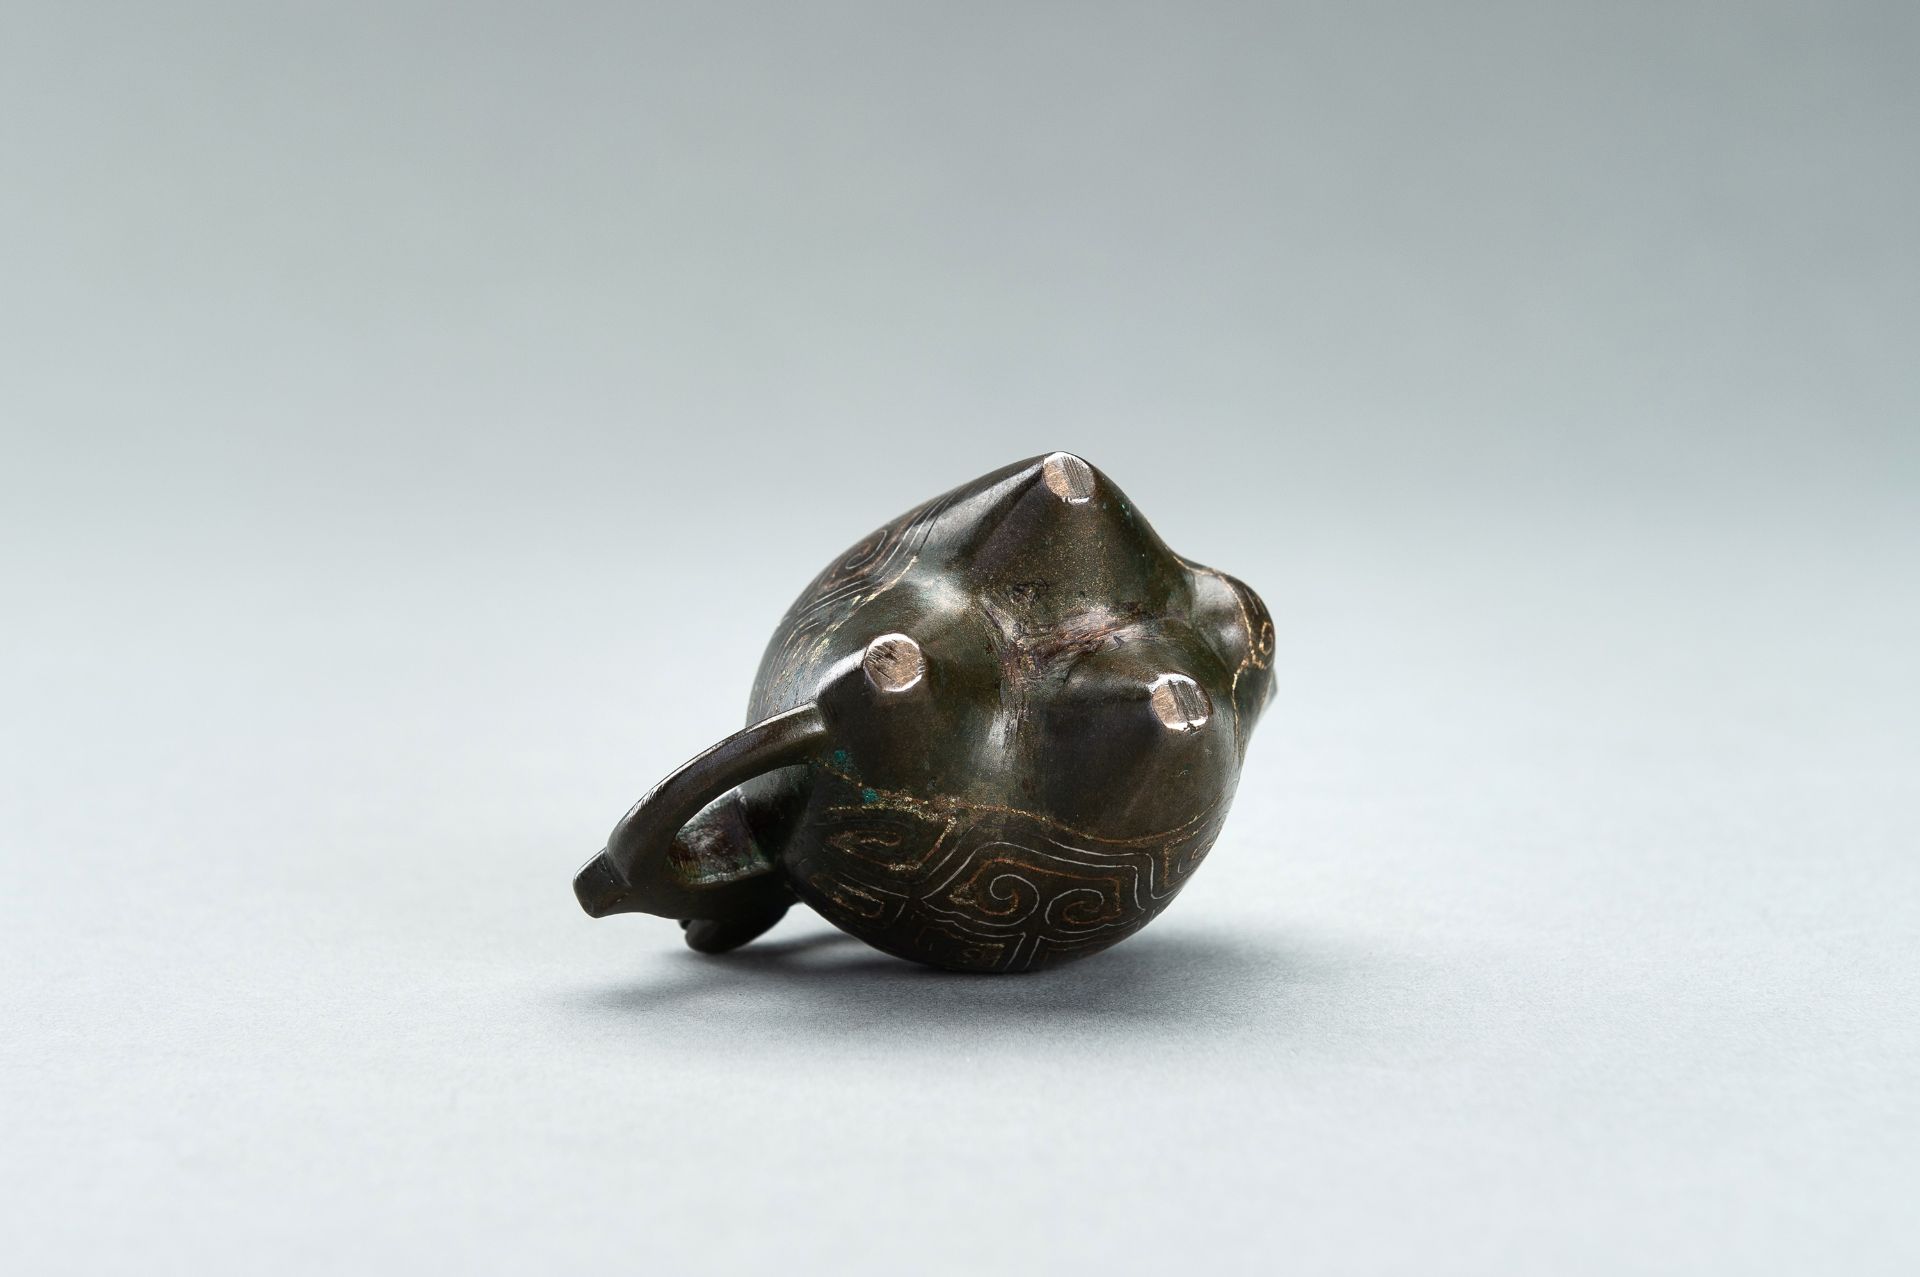 A SMALL COPPER AND SILVER INLAID BRONZE POURING TRIPOD VESSEL IN THE FORM OF AN ANIMAL, 17TH CENTURY - Image 11 of 11